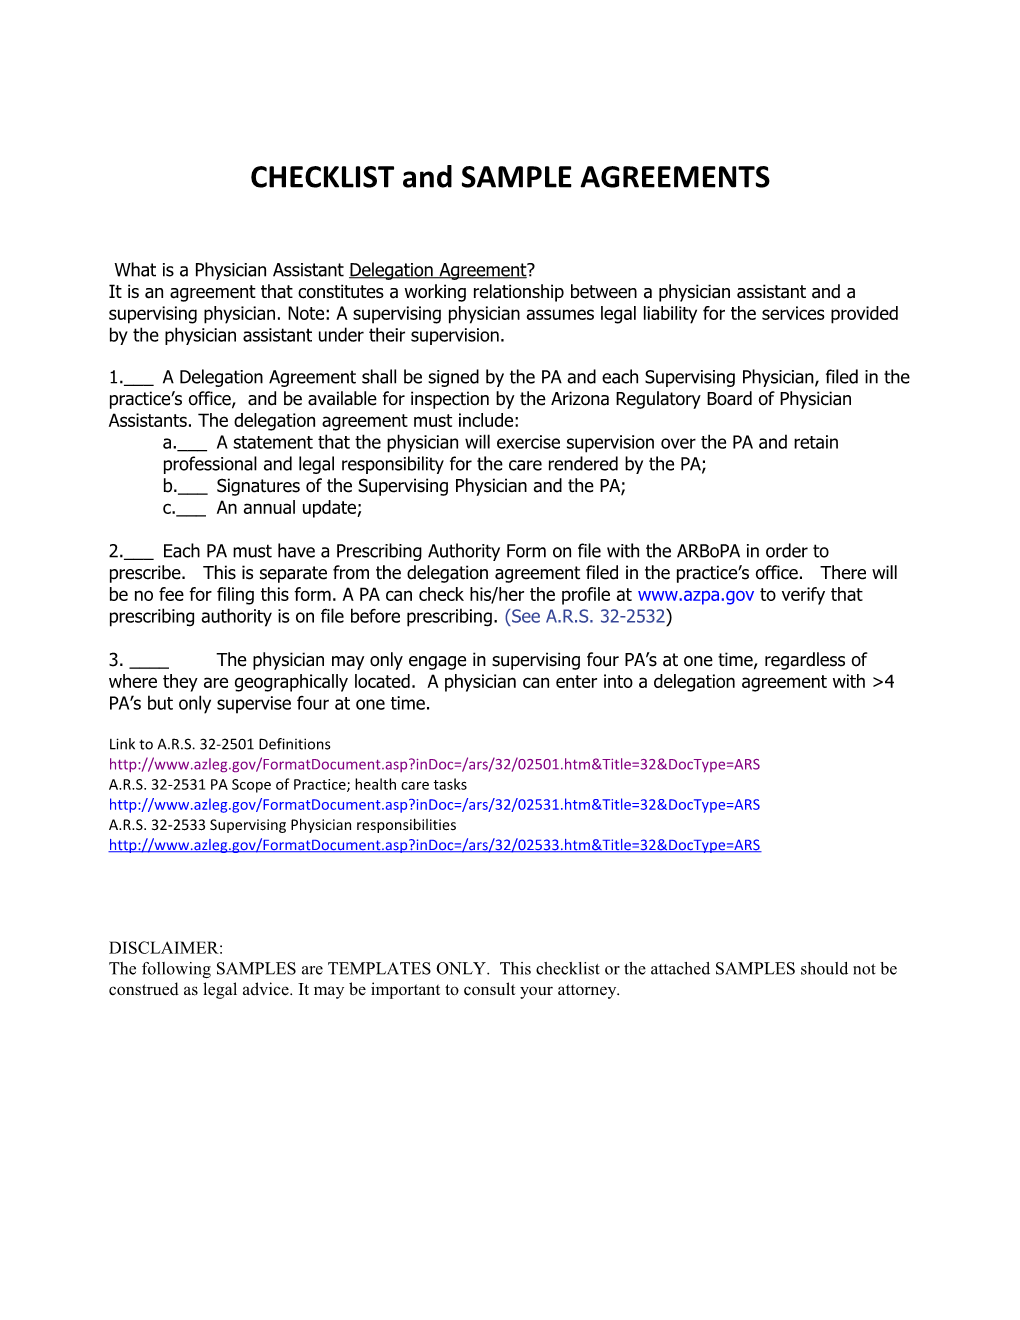 CHECKLIST and SAMPLE AGREEMENTS